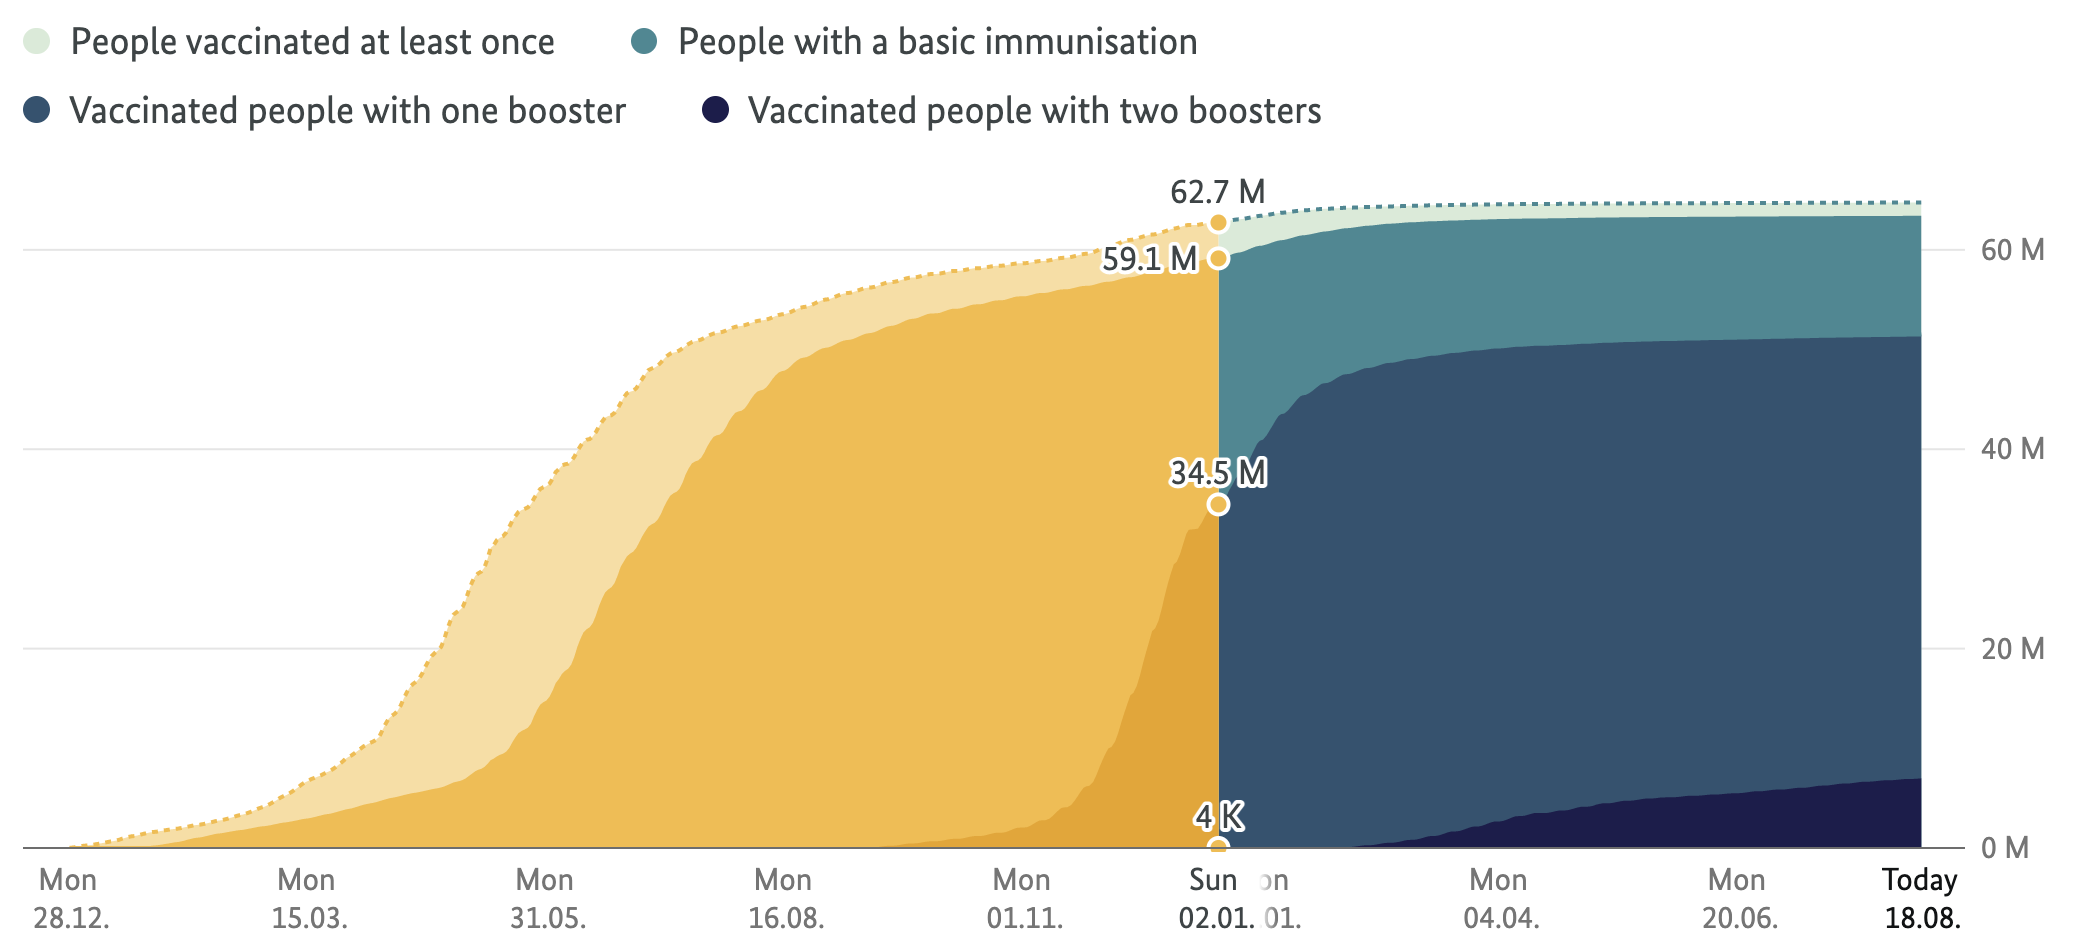 A stacked area chart showing the number of vaccinated people in Germany. When hovering the chart, data values are displayed